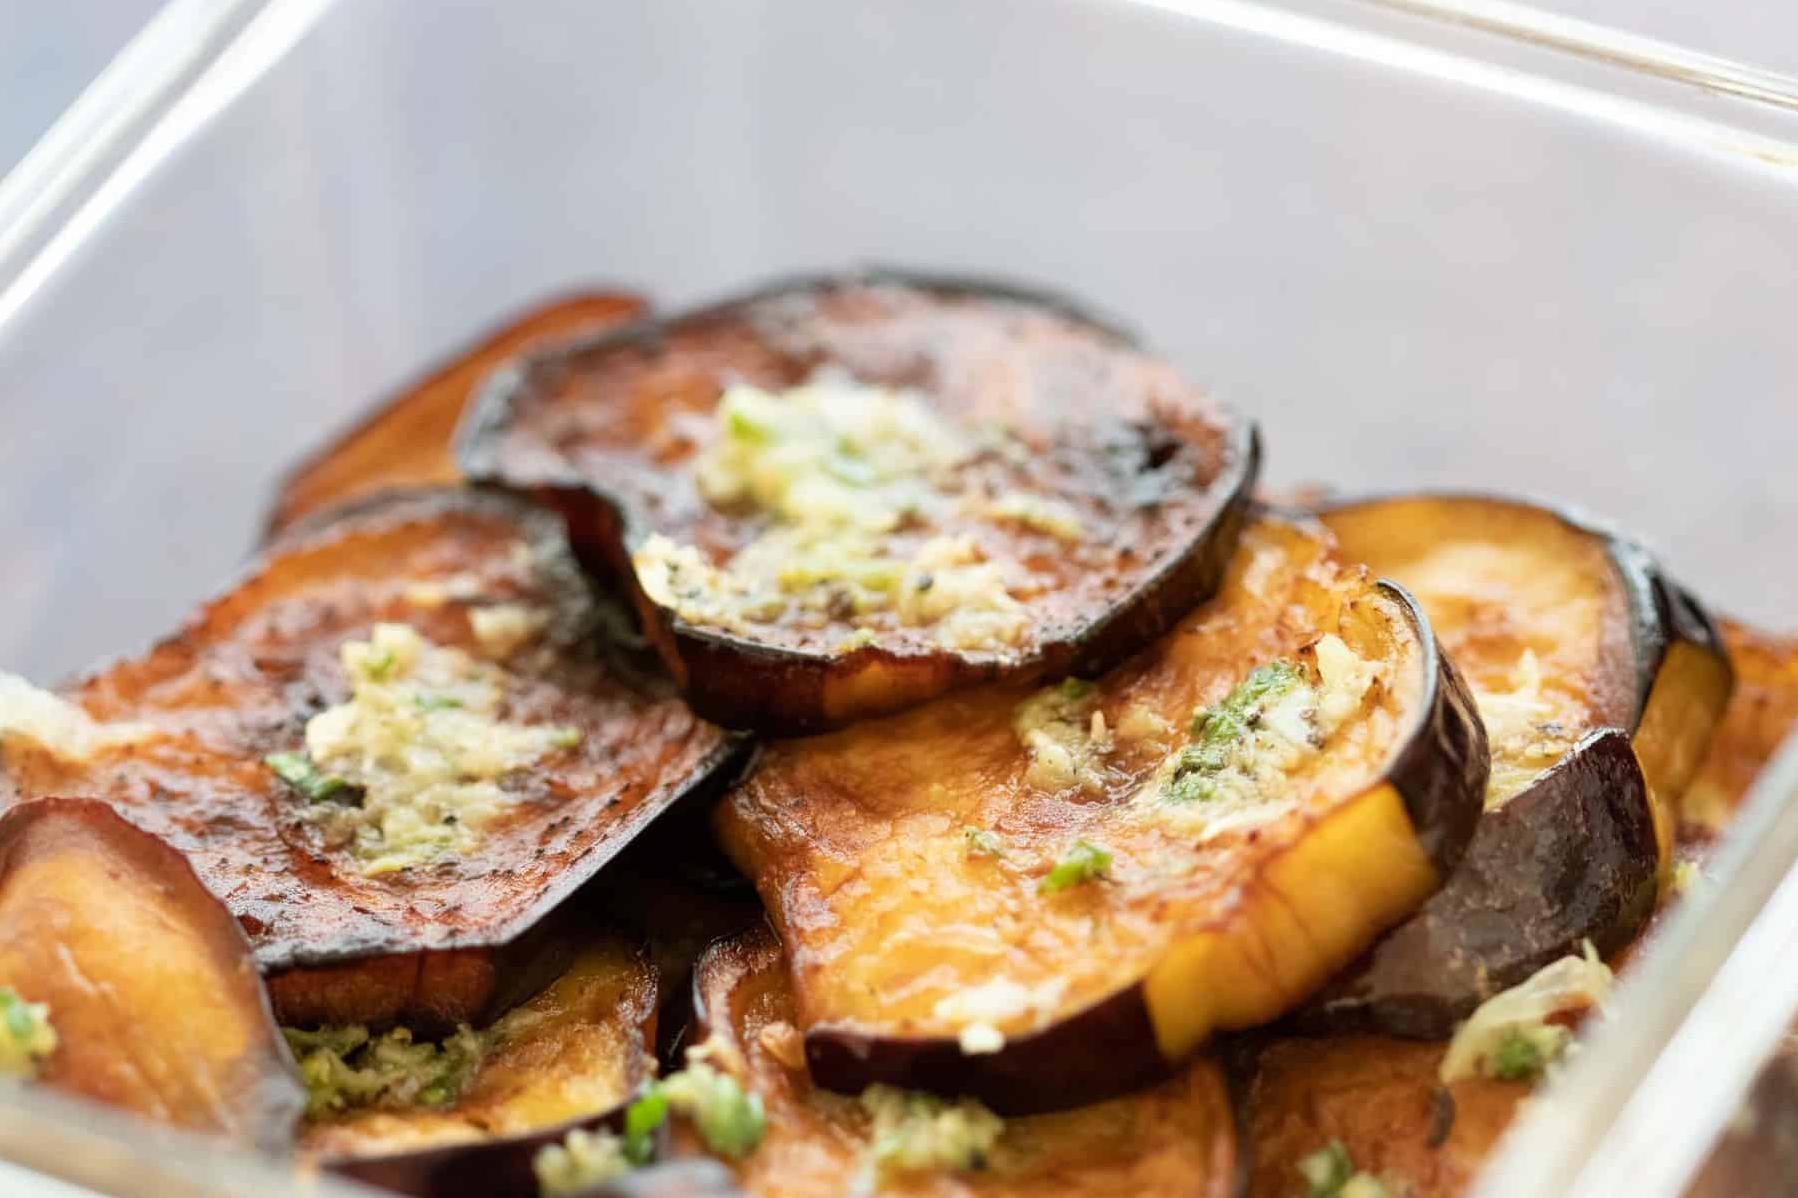  Dive into the rich flavors of Egyptian cuisine with this delicious eggplant dish.